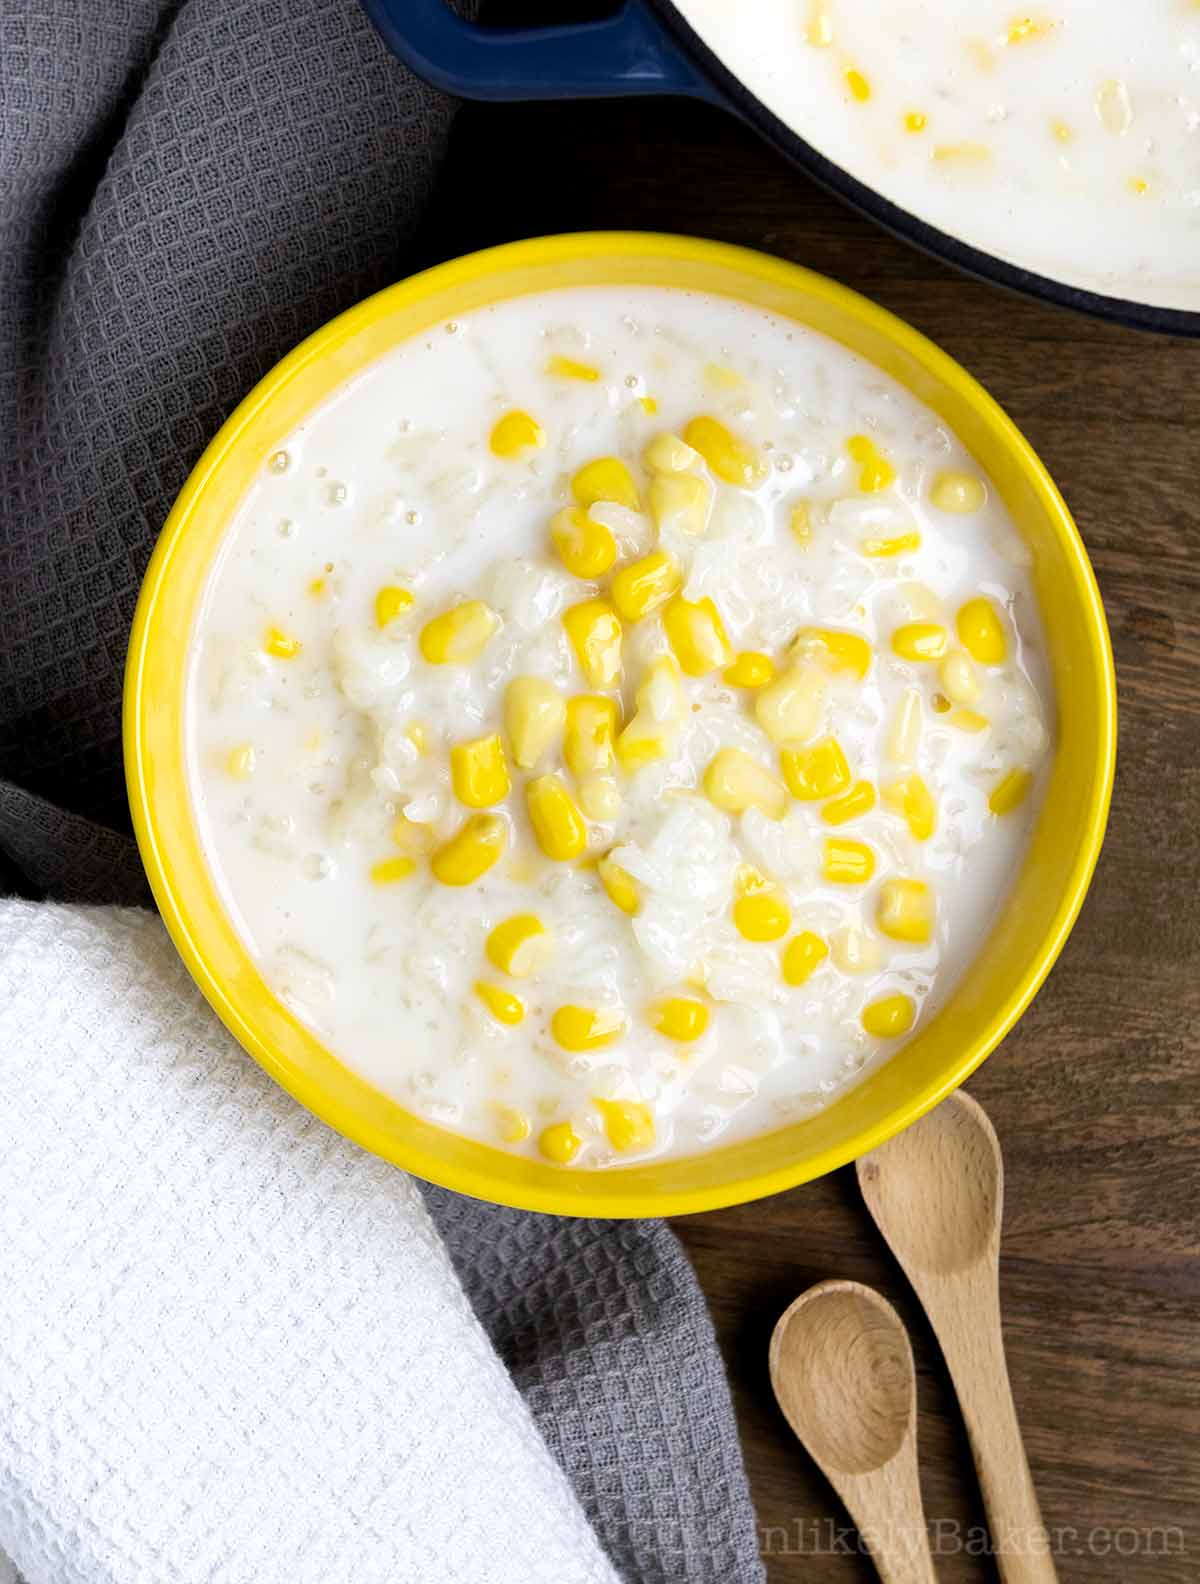 Filipino sweet coconut rice pudding in a yellow bowl.